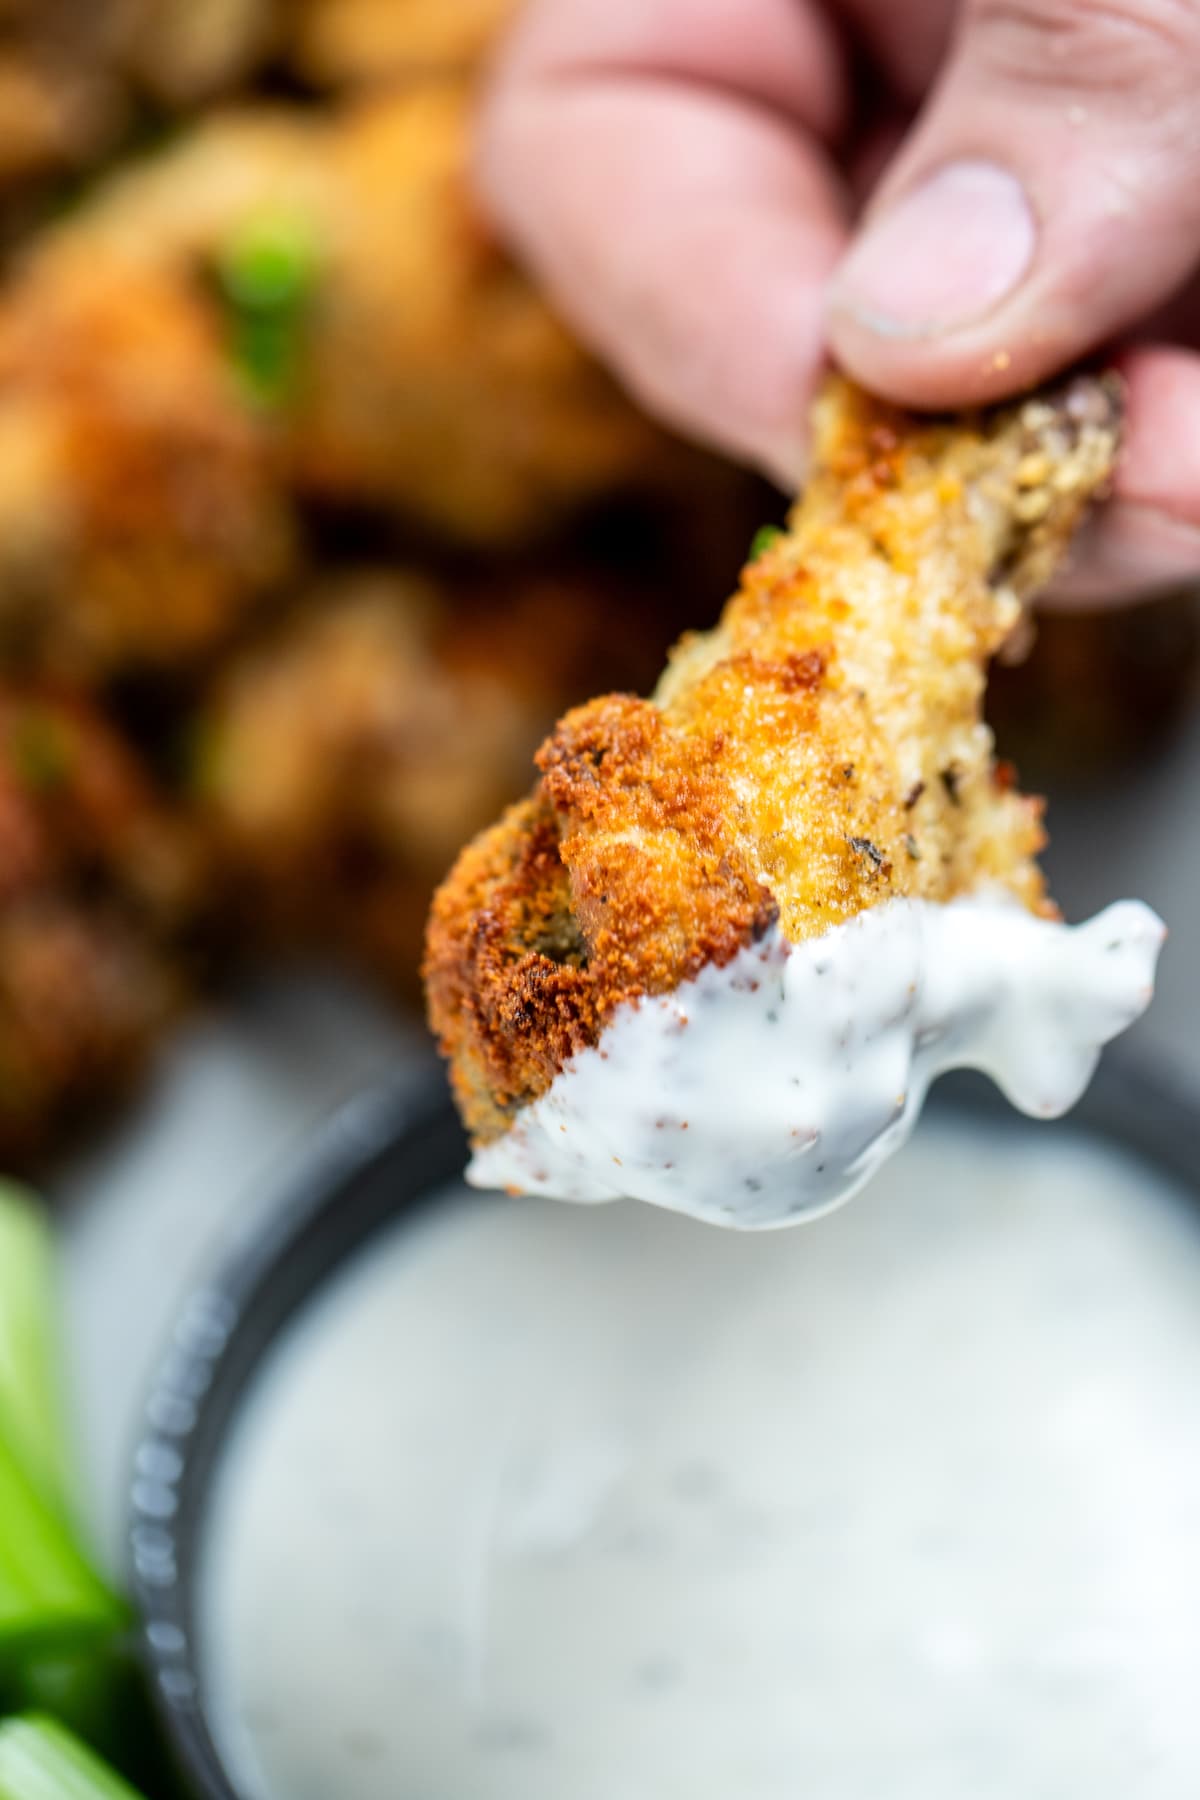 A hand holding a garlic parmesan chicken wing after dipping it in ranch, with more wings in the background.